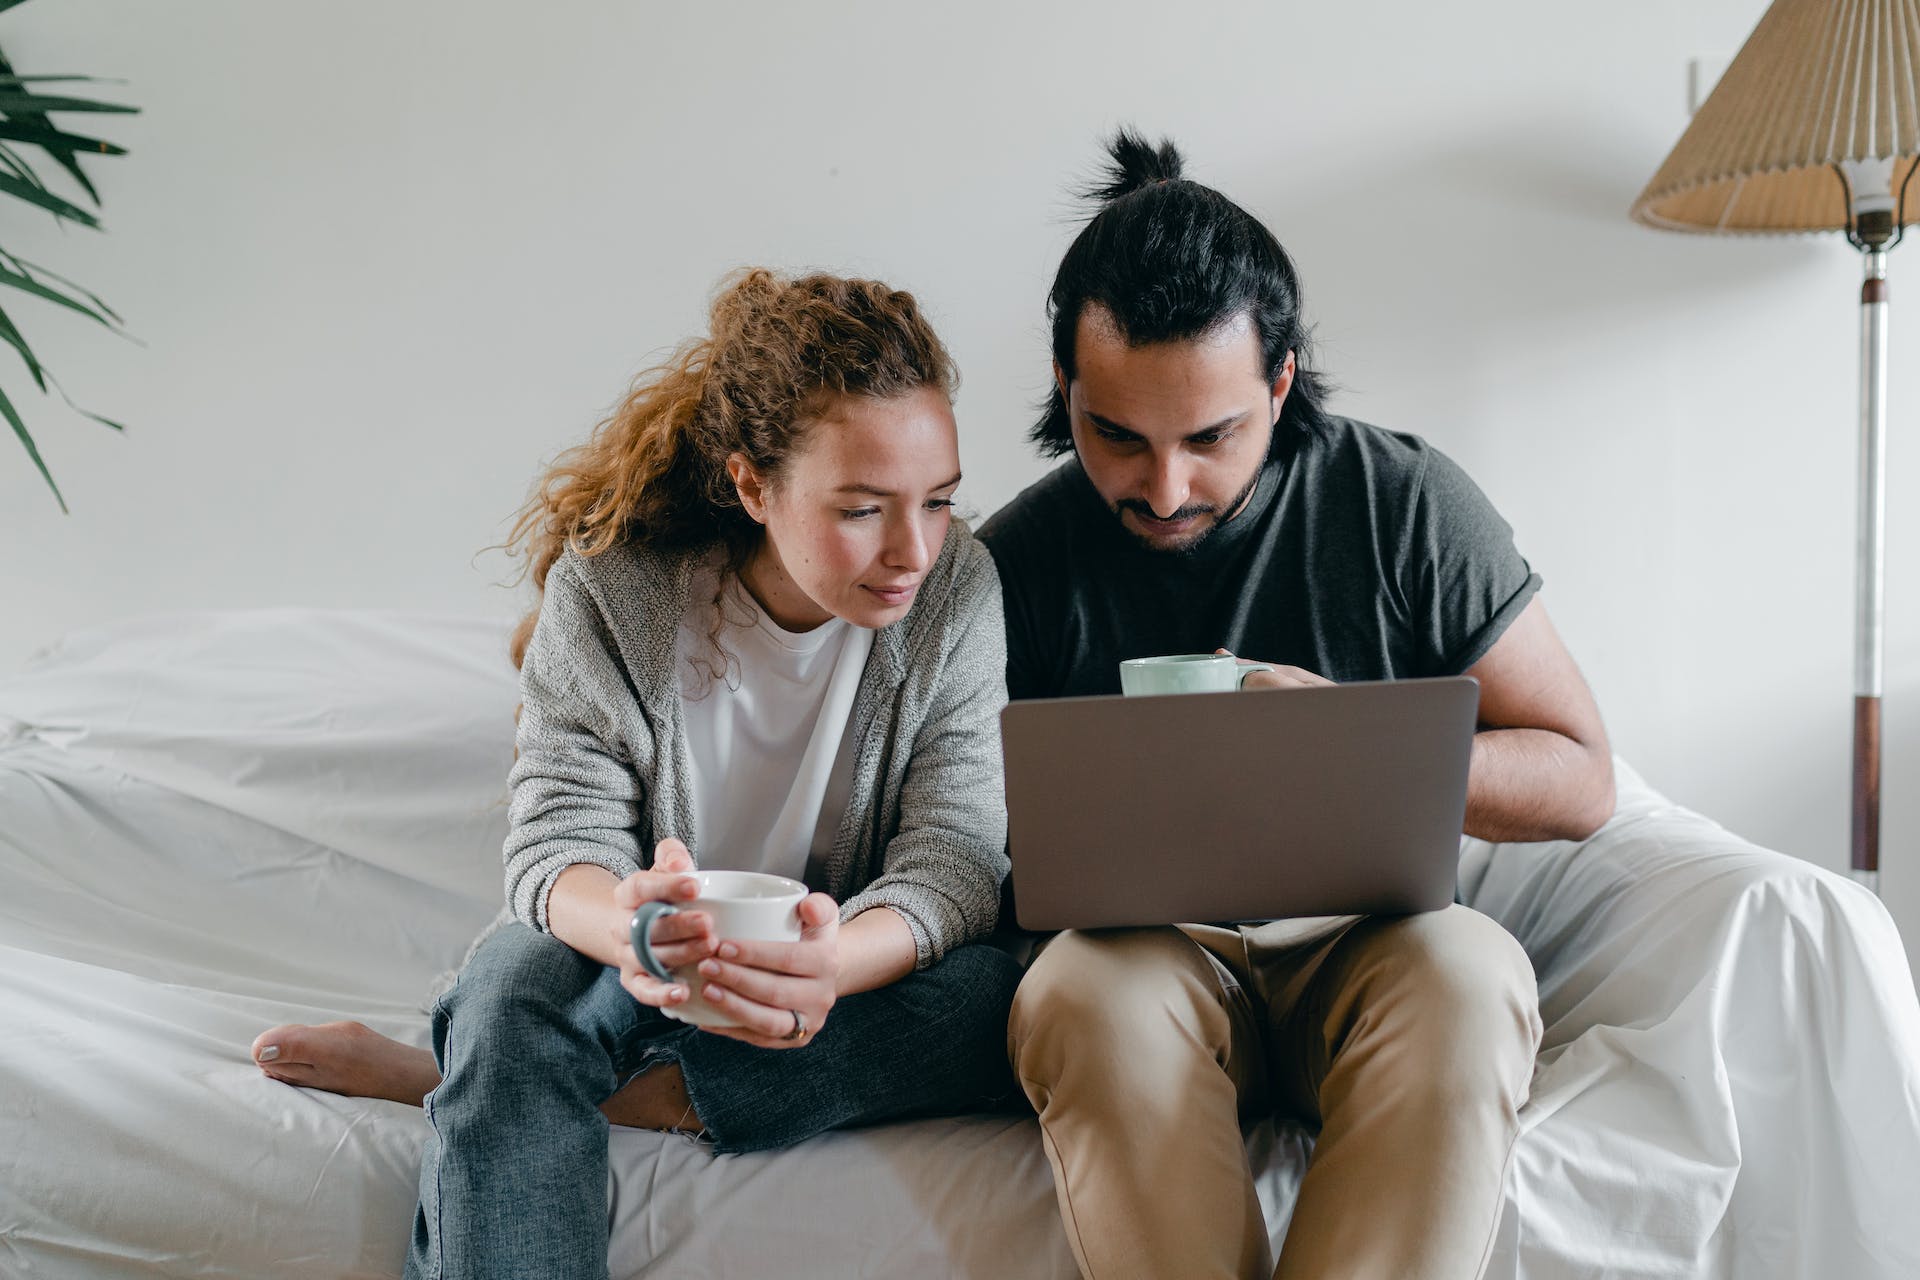 A couple working together on the laptop | Source: Pexels